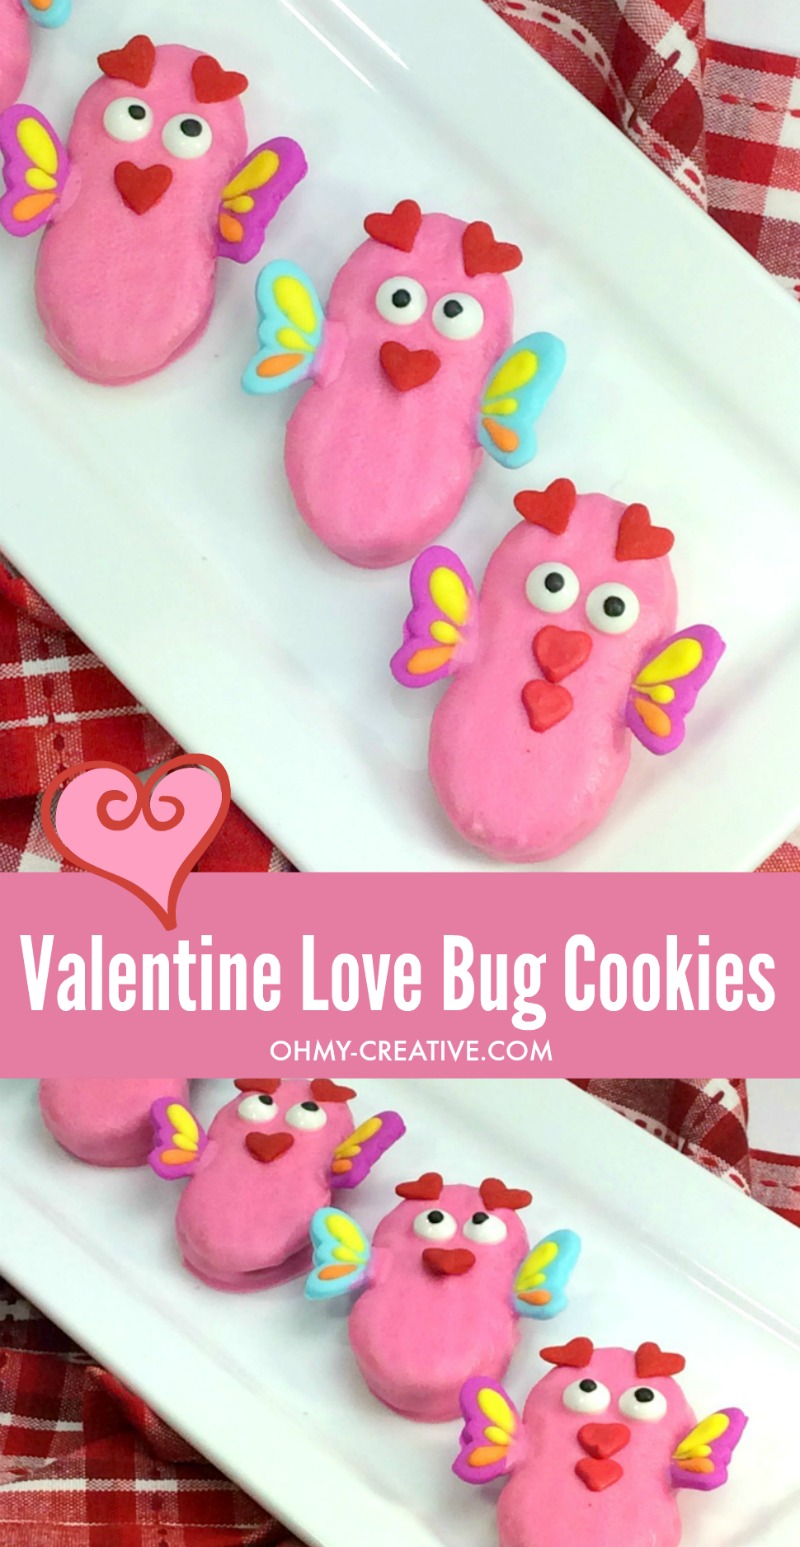 Love Bug Cookies | OHMY-CREATIVE.COM | Valentine's Day Cookies | Cookies for Valentine's Day | Valentine Treats | Valentine Cookie Recipe | Valentine Cookies | Nutter Butter Cookies